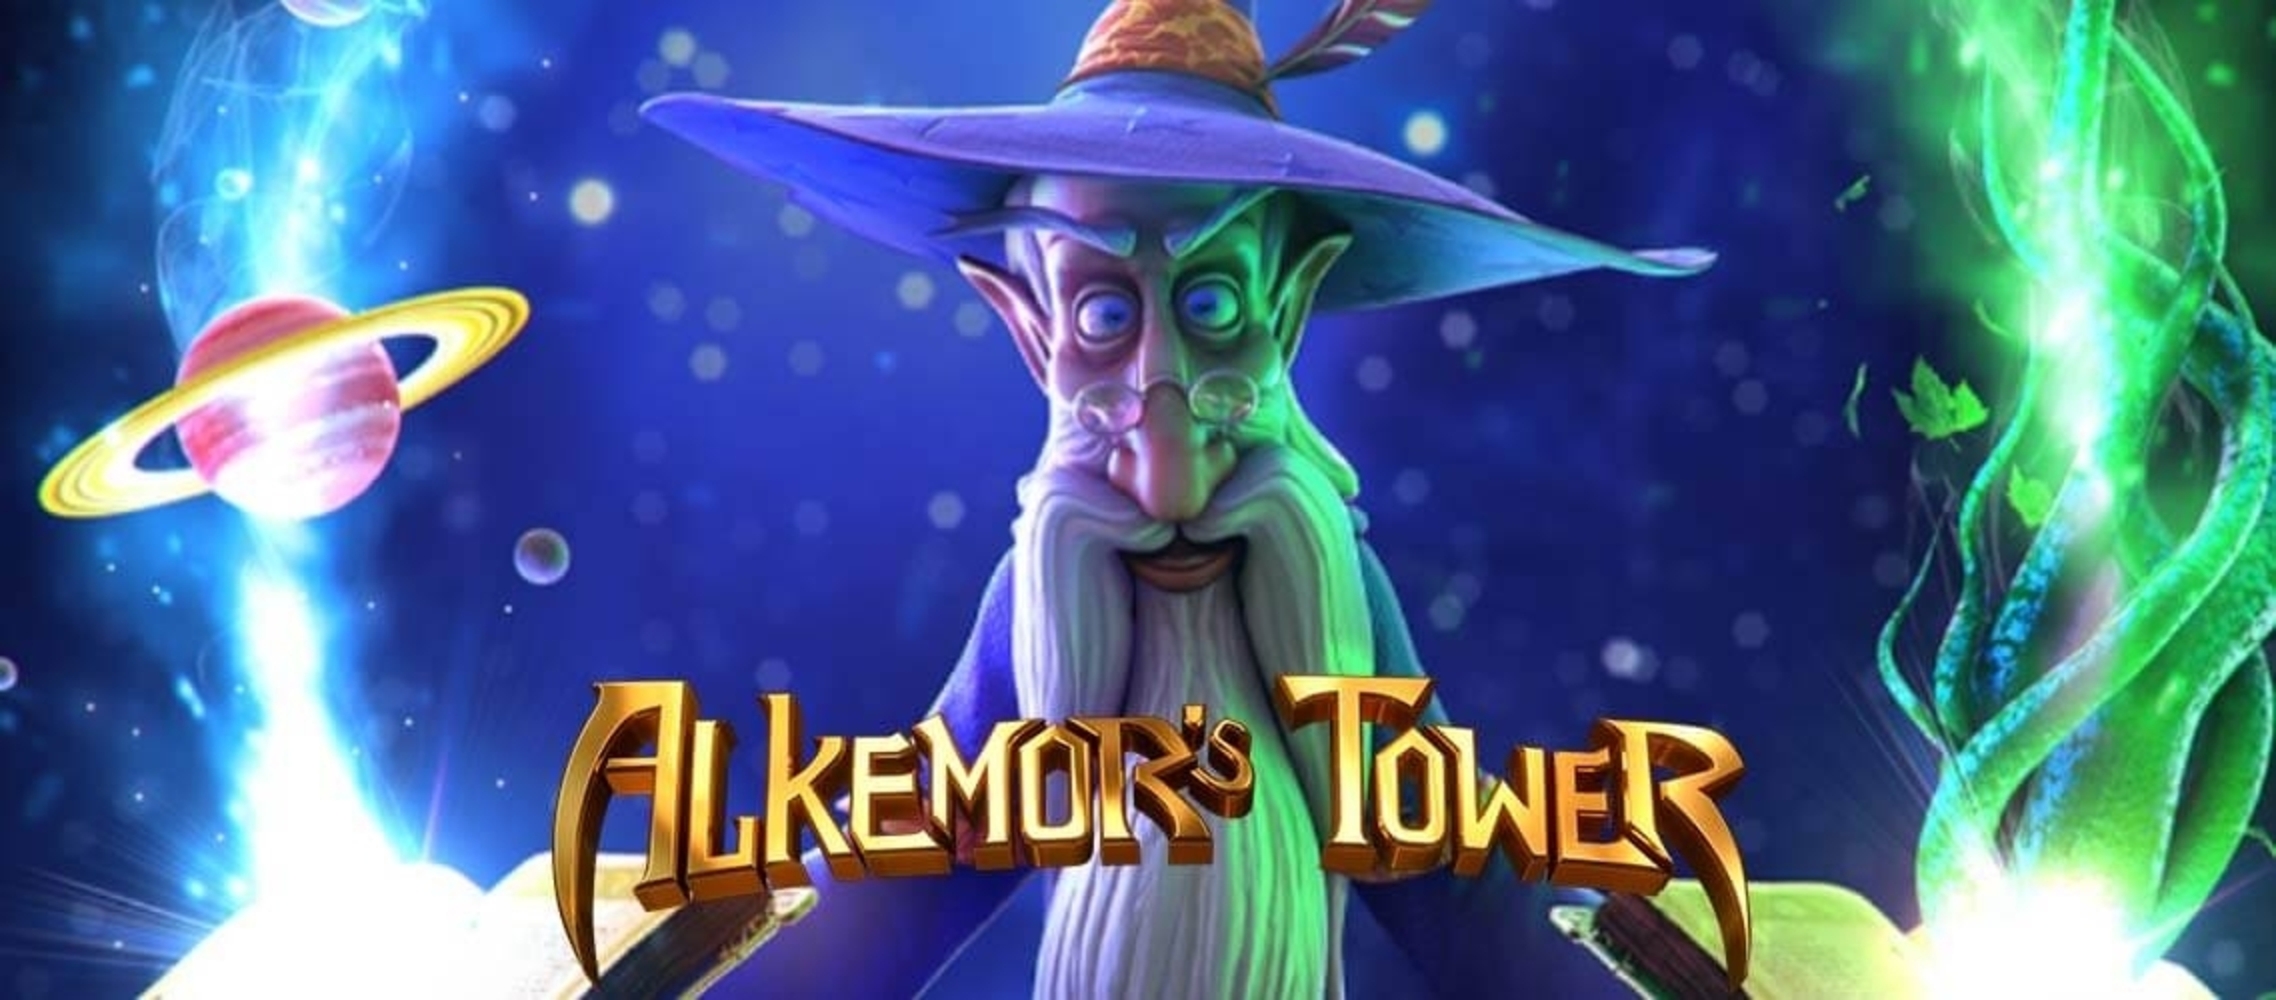 The Alkemors Tower Online Slot Demo Game by Betsoft